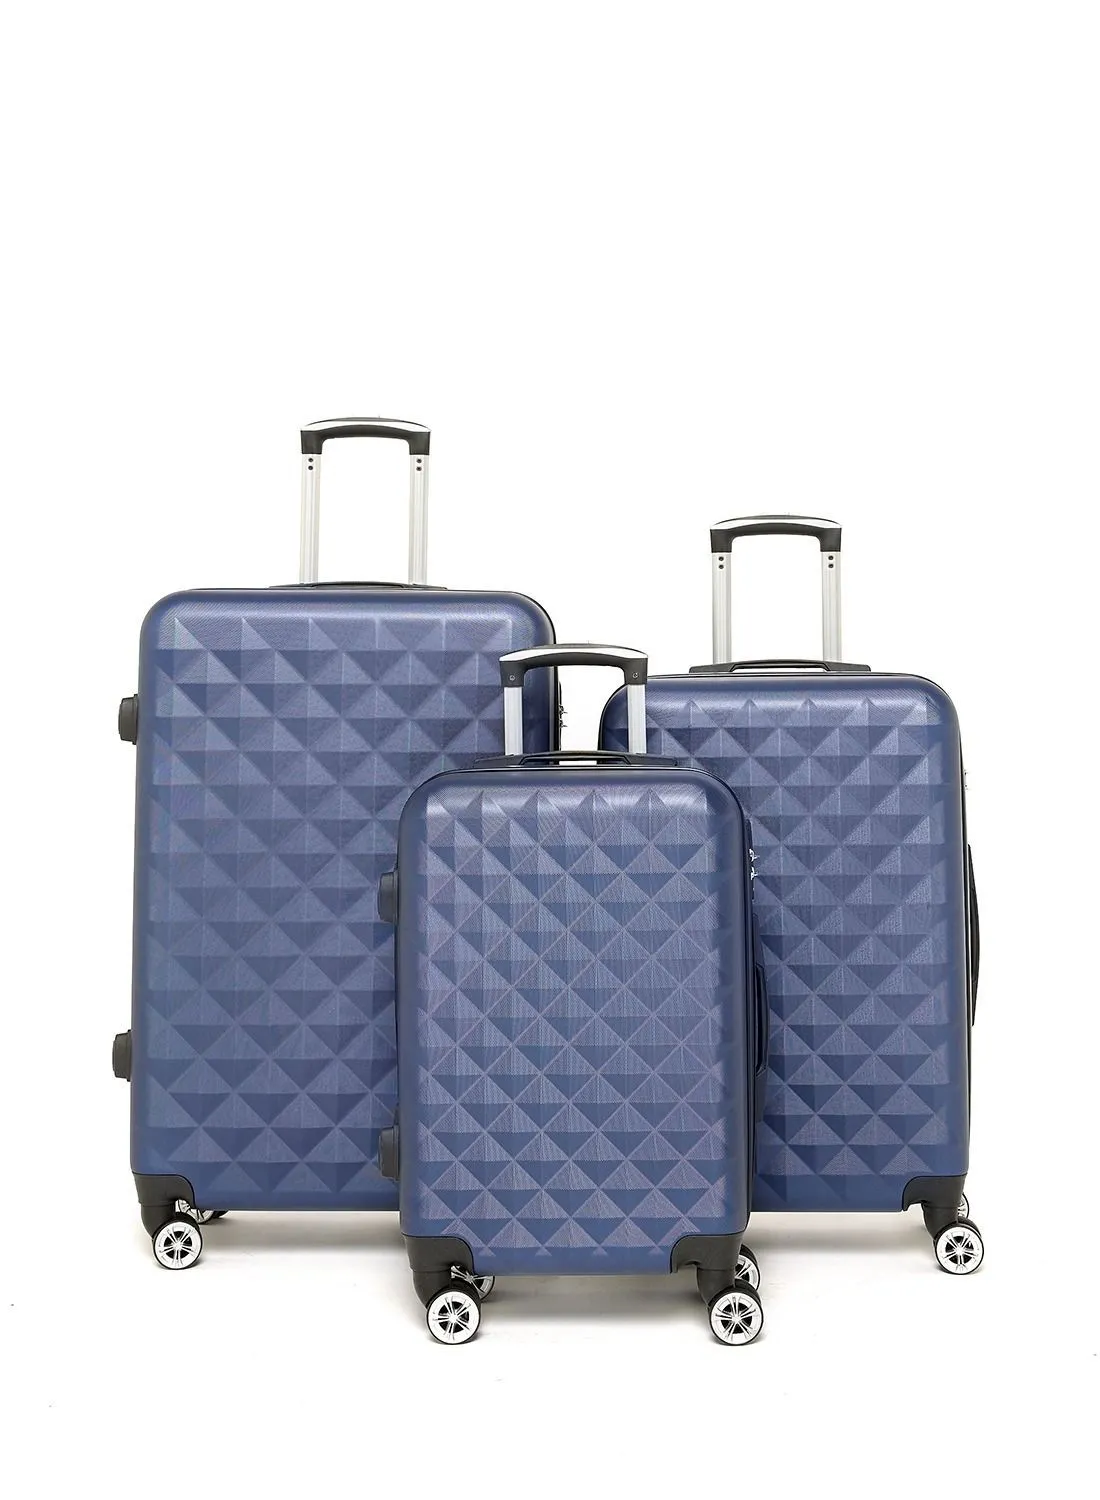 noon east 3-Piece ABS Hardside Spinner Iron Rod Luggage Trolley Set With TSA Lock 20/24/28 Inch